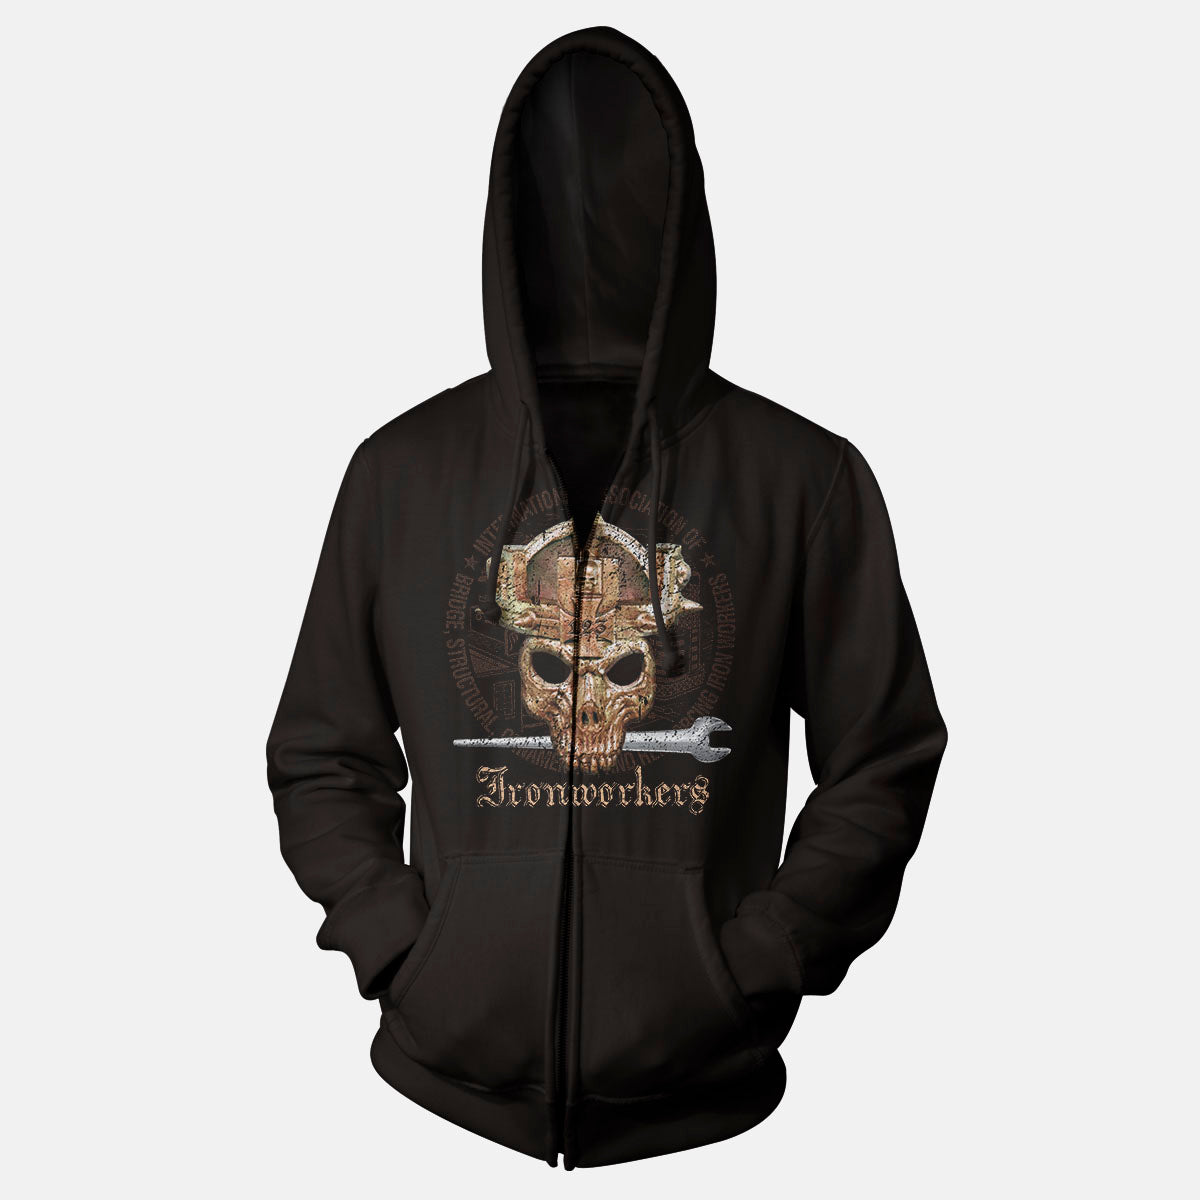 Ironworkers Skull Mask Union Apparel